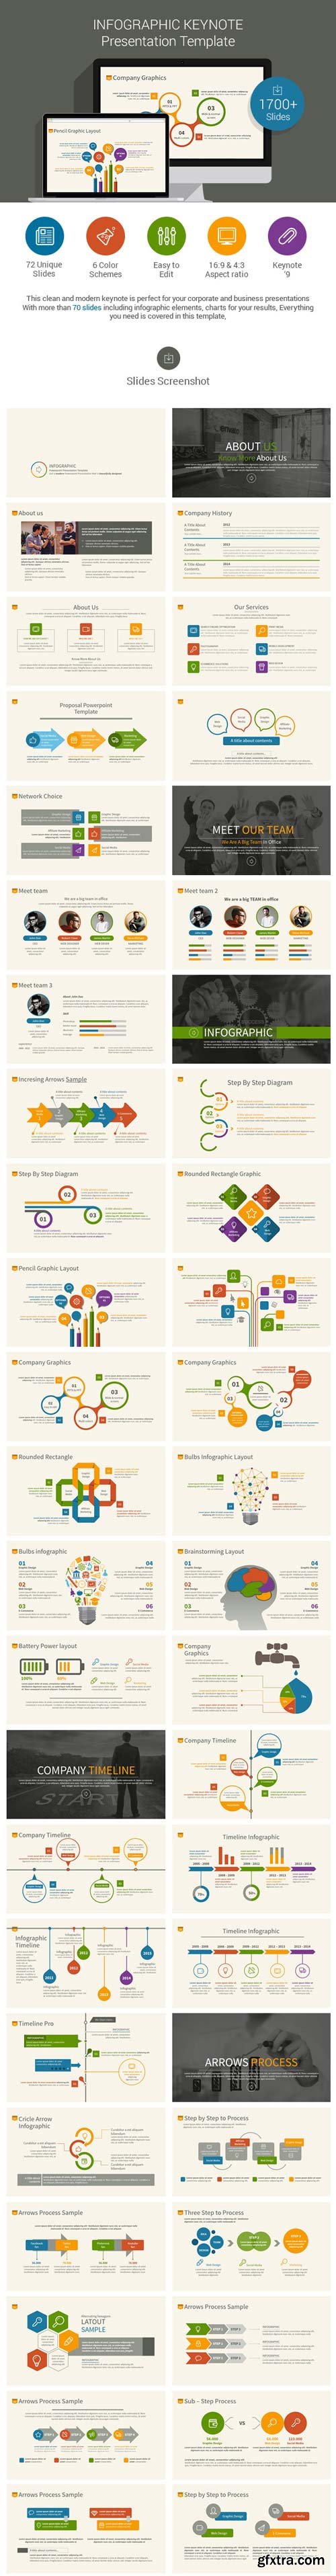 GraphicRiver - Infographic Keynote Template